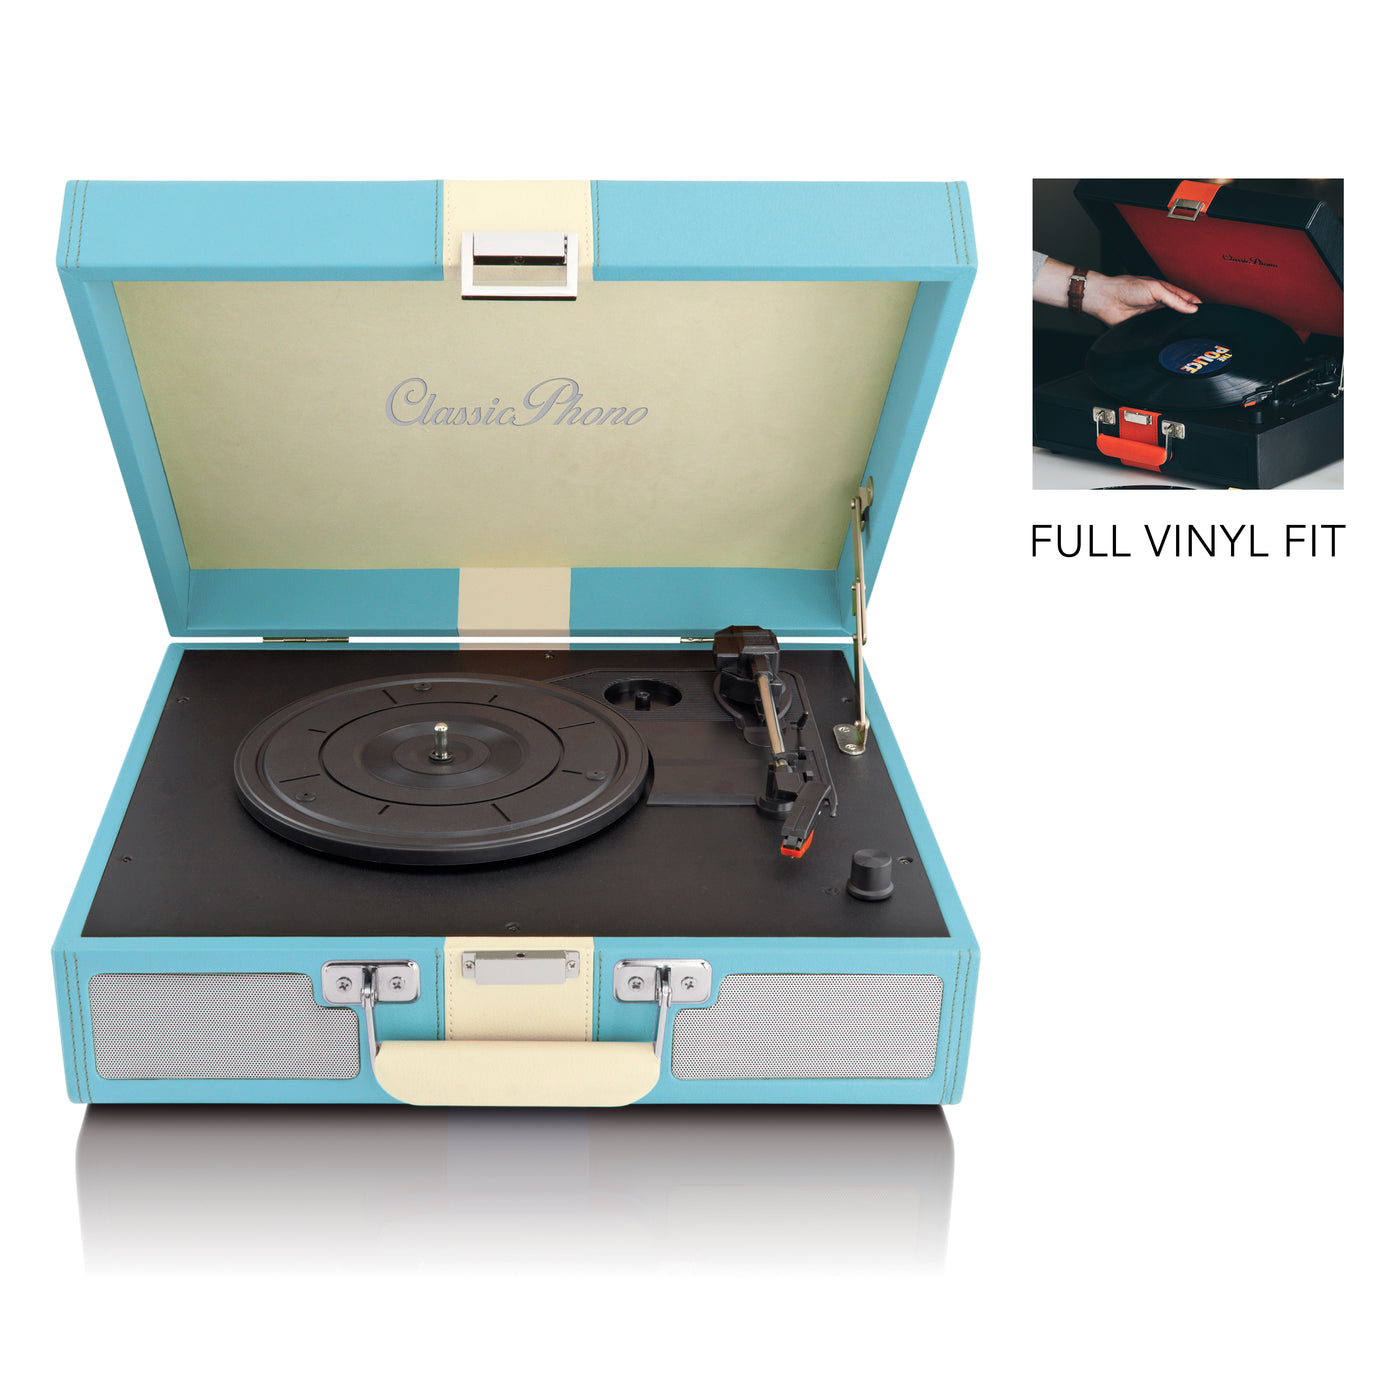 CLASSIC PHONO TT-33 Blue - Turntable in suitcase - Built-in speakers - Blue